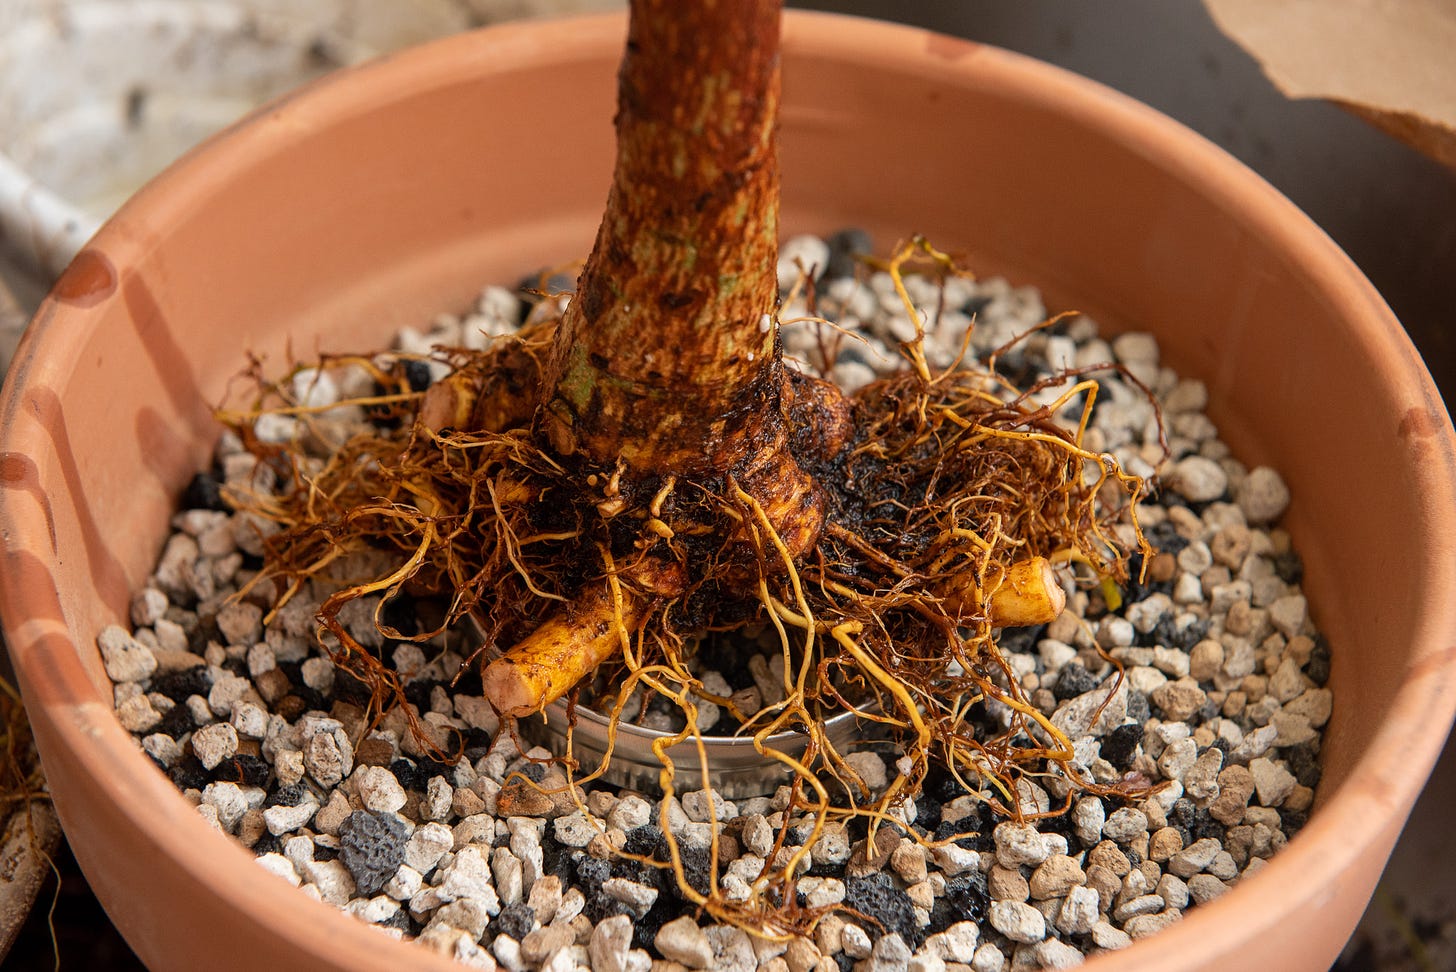 ID: Severely root pruned ficus religiosa in bonsai soil in a large terra cotta pot, showing the root ball